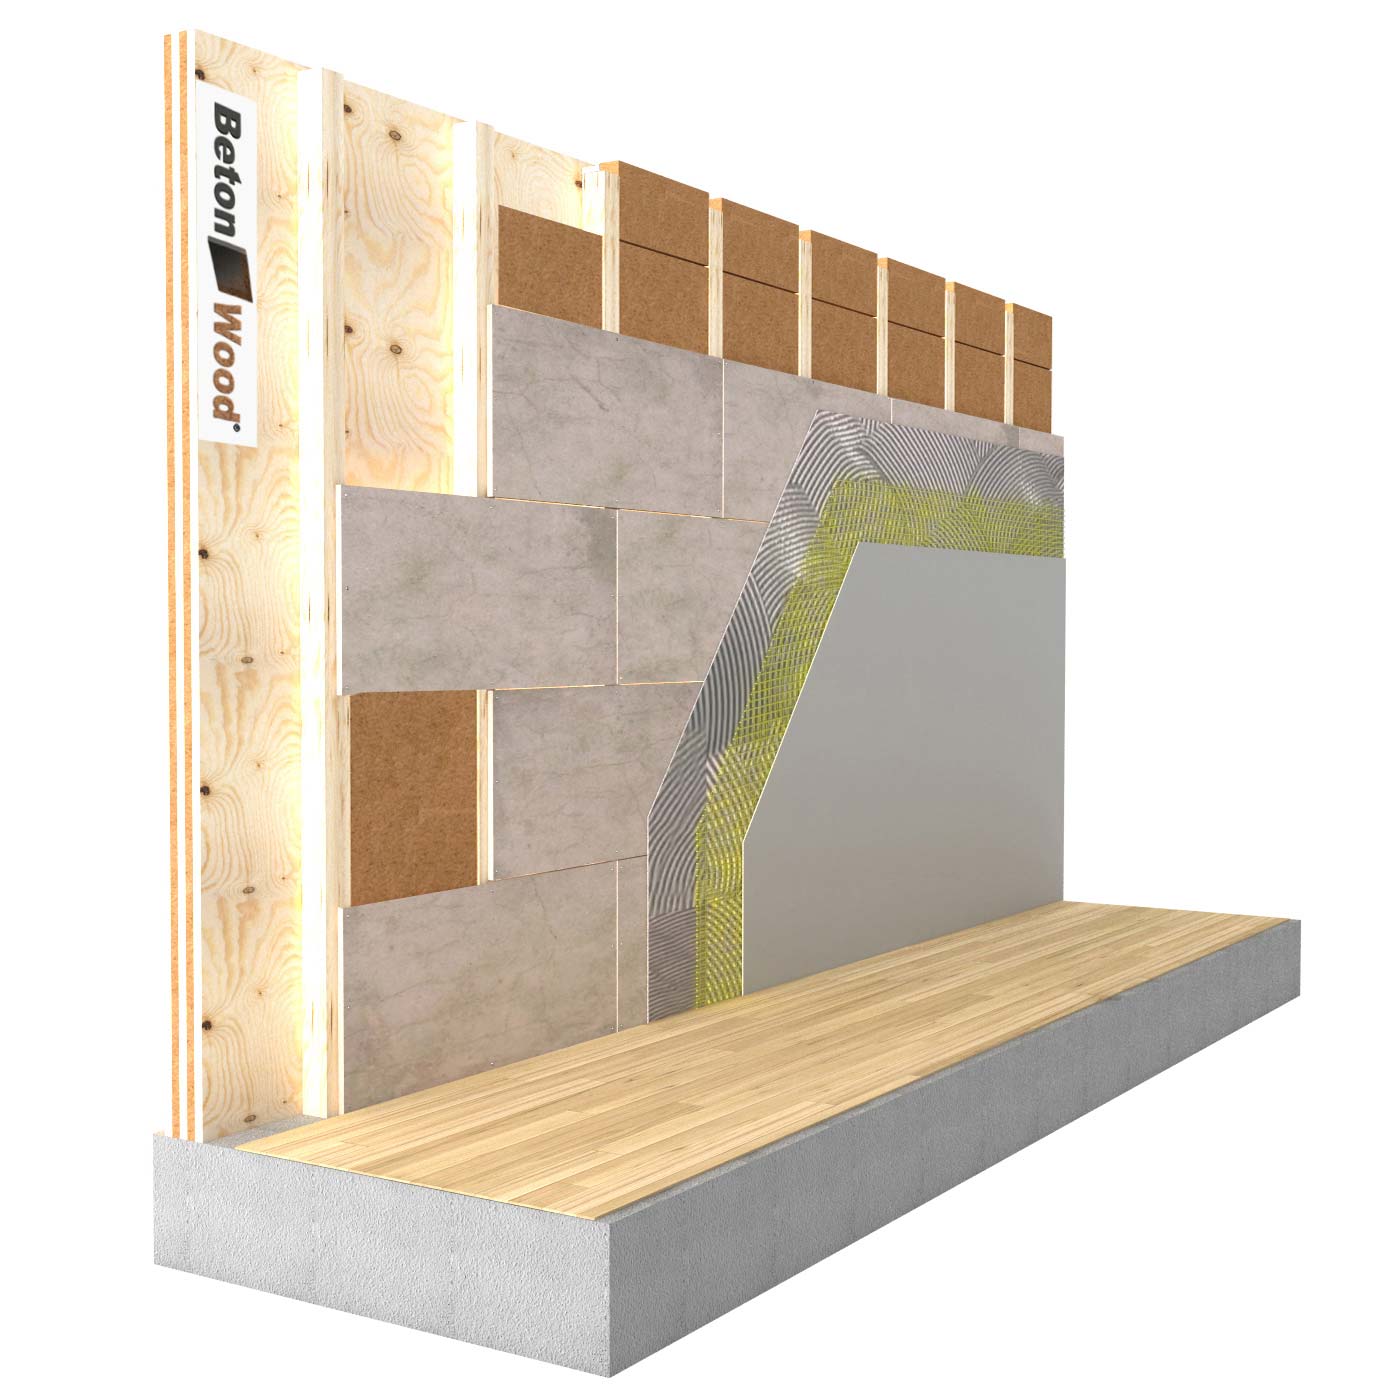 Internal insulation system with Therm wood fiber on wooden walls